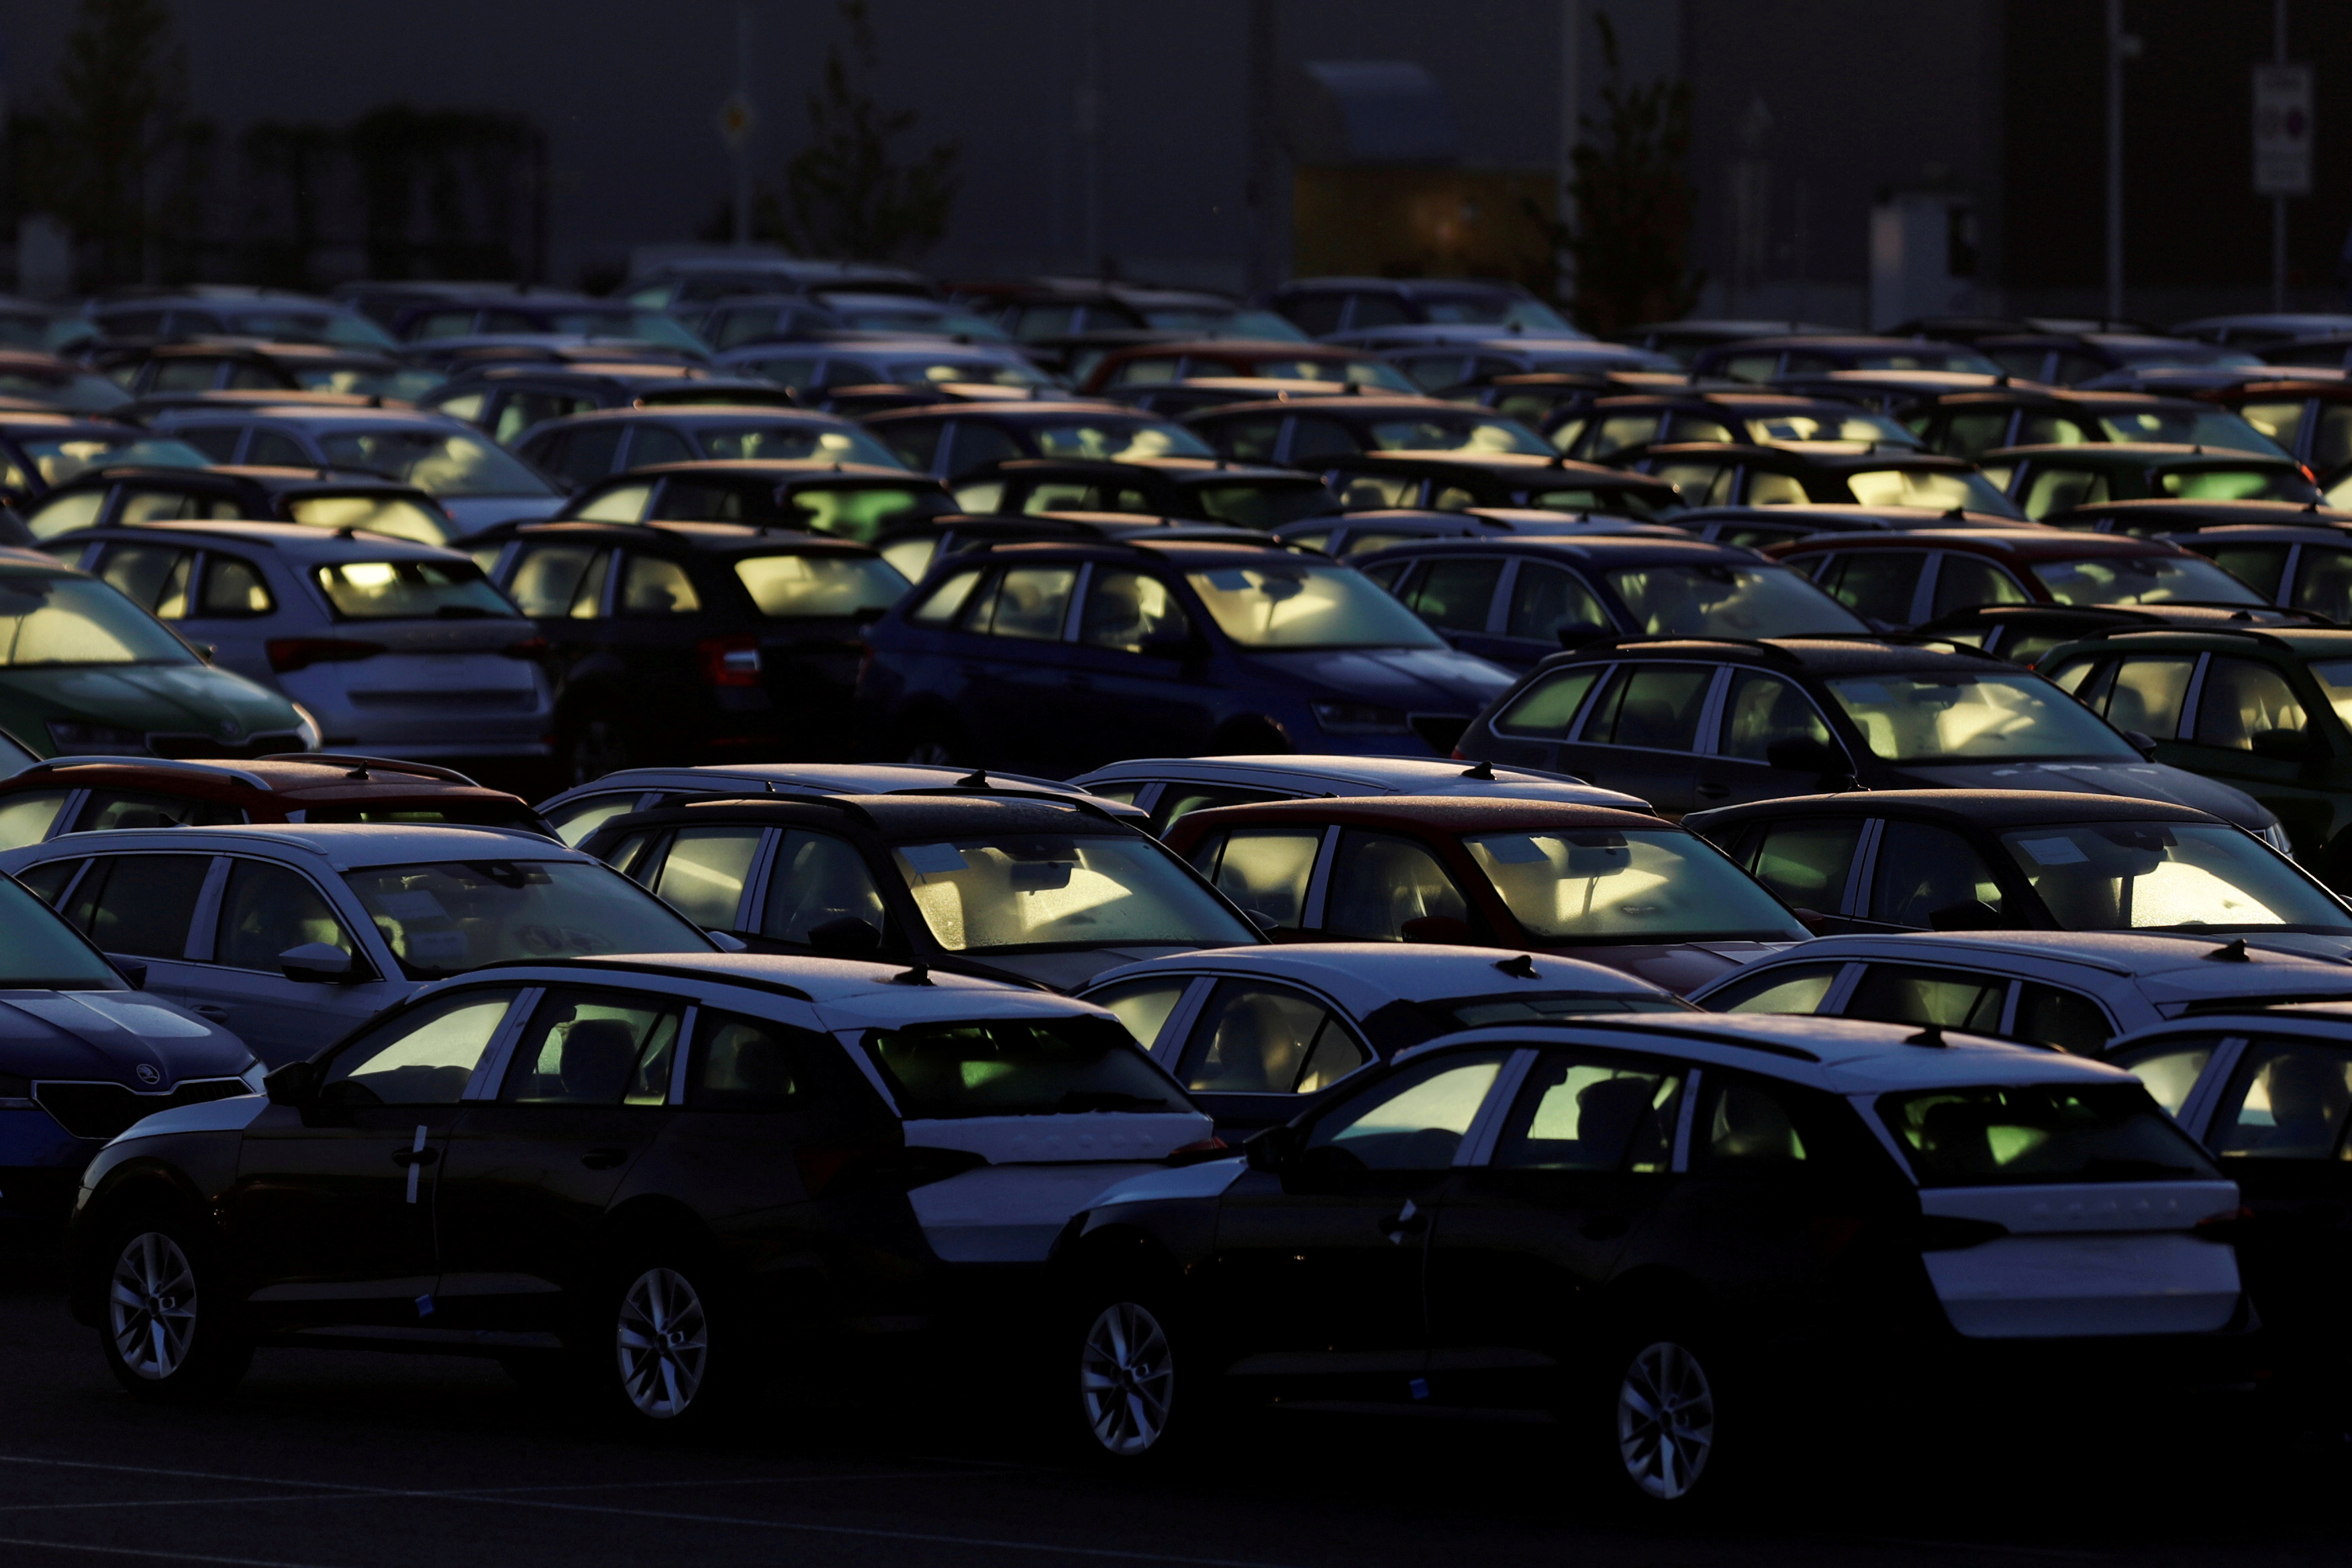 Cars are parked in the courtyard of Skoda Auto's factory in Mlada Boleslav, Czech Republic, as the company restarts production after shutting downdue to the coronavirus pandemic (COVID-19) . Picture taken in Mlada Boleslav, Czech Republic, April 27, 2020. REUTERS/David W Cerny/File Photo